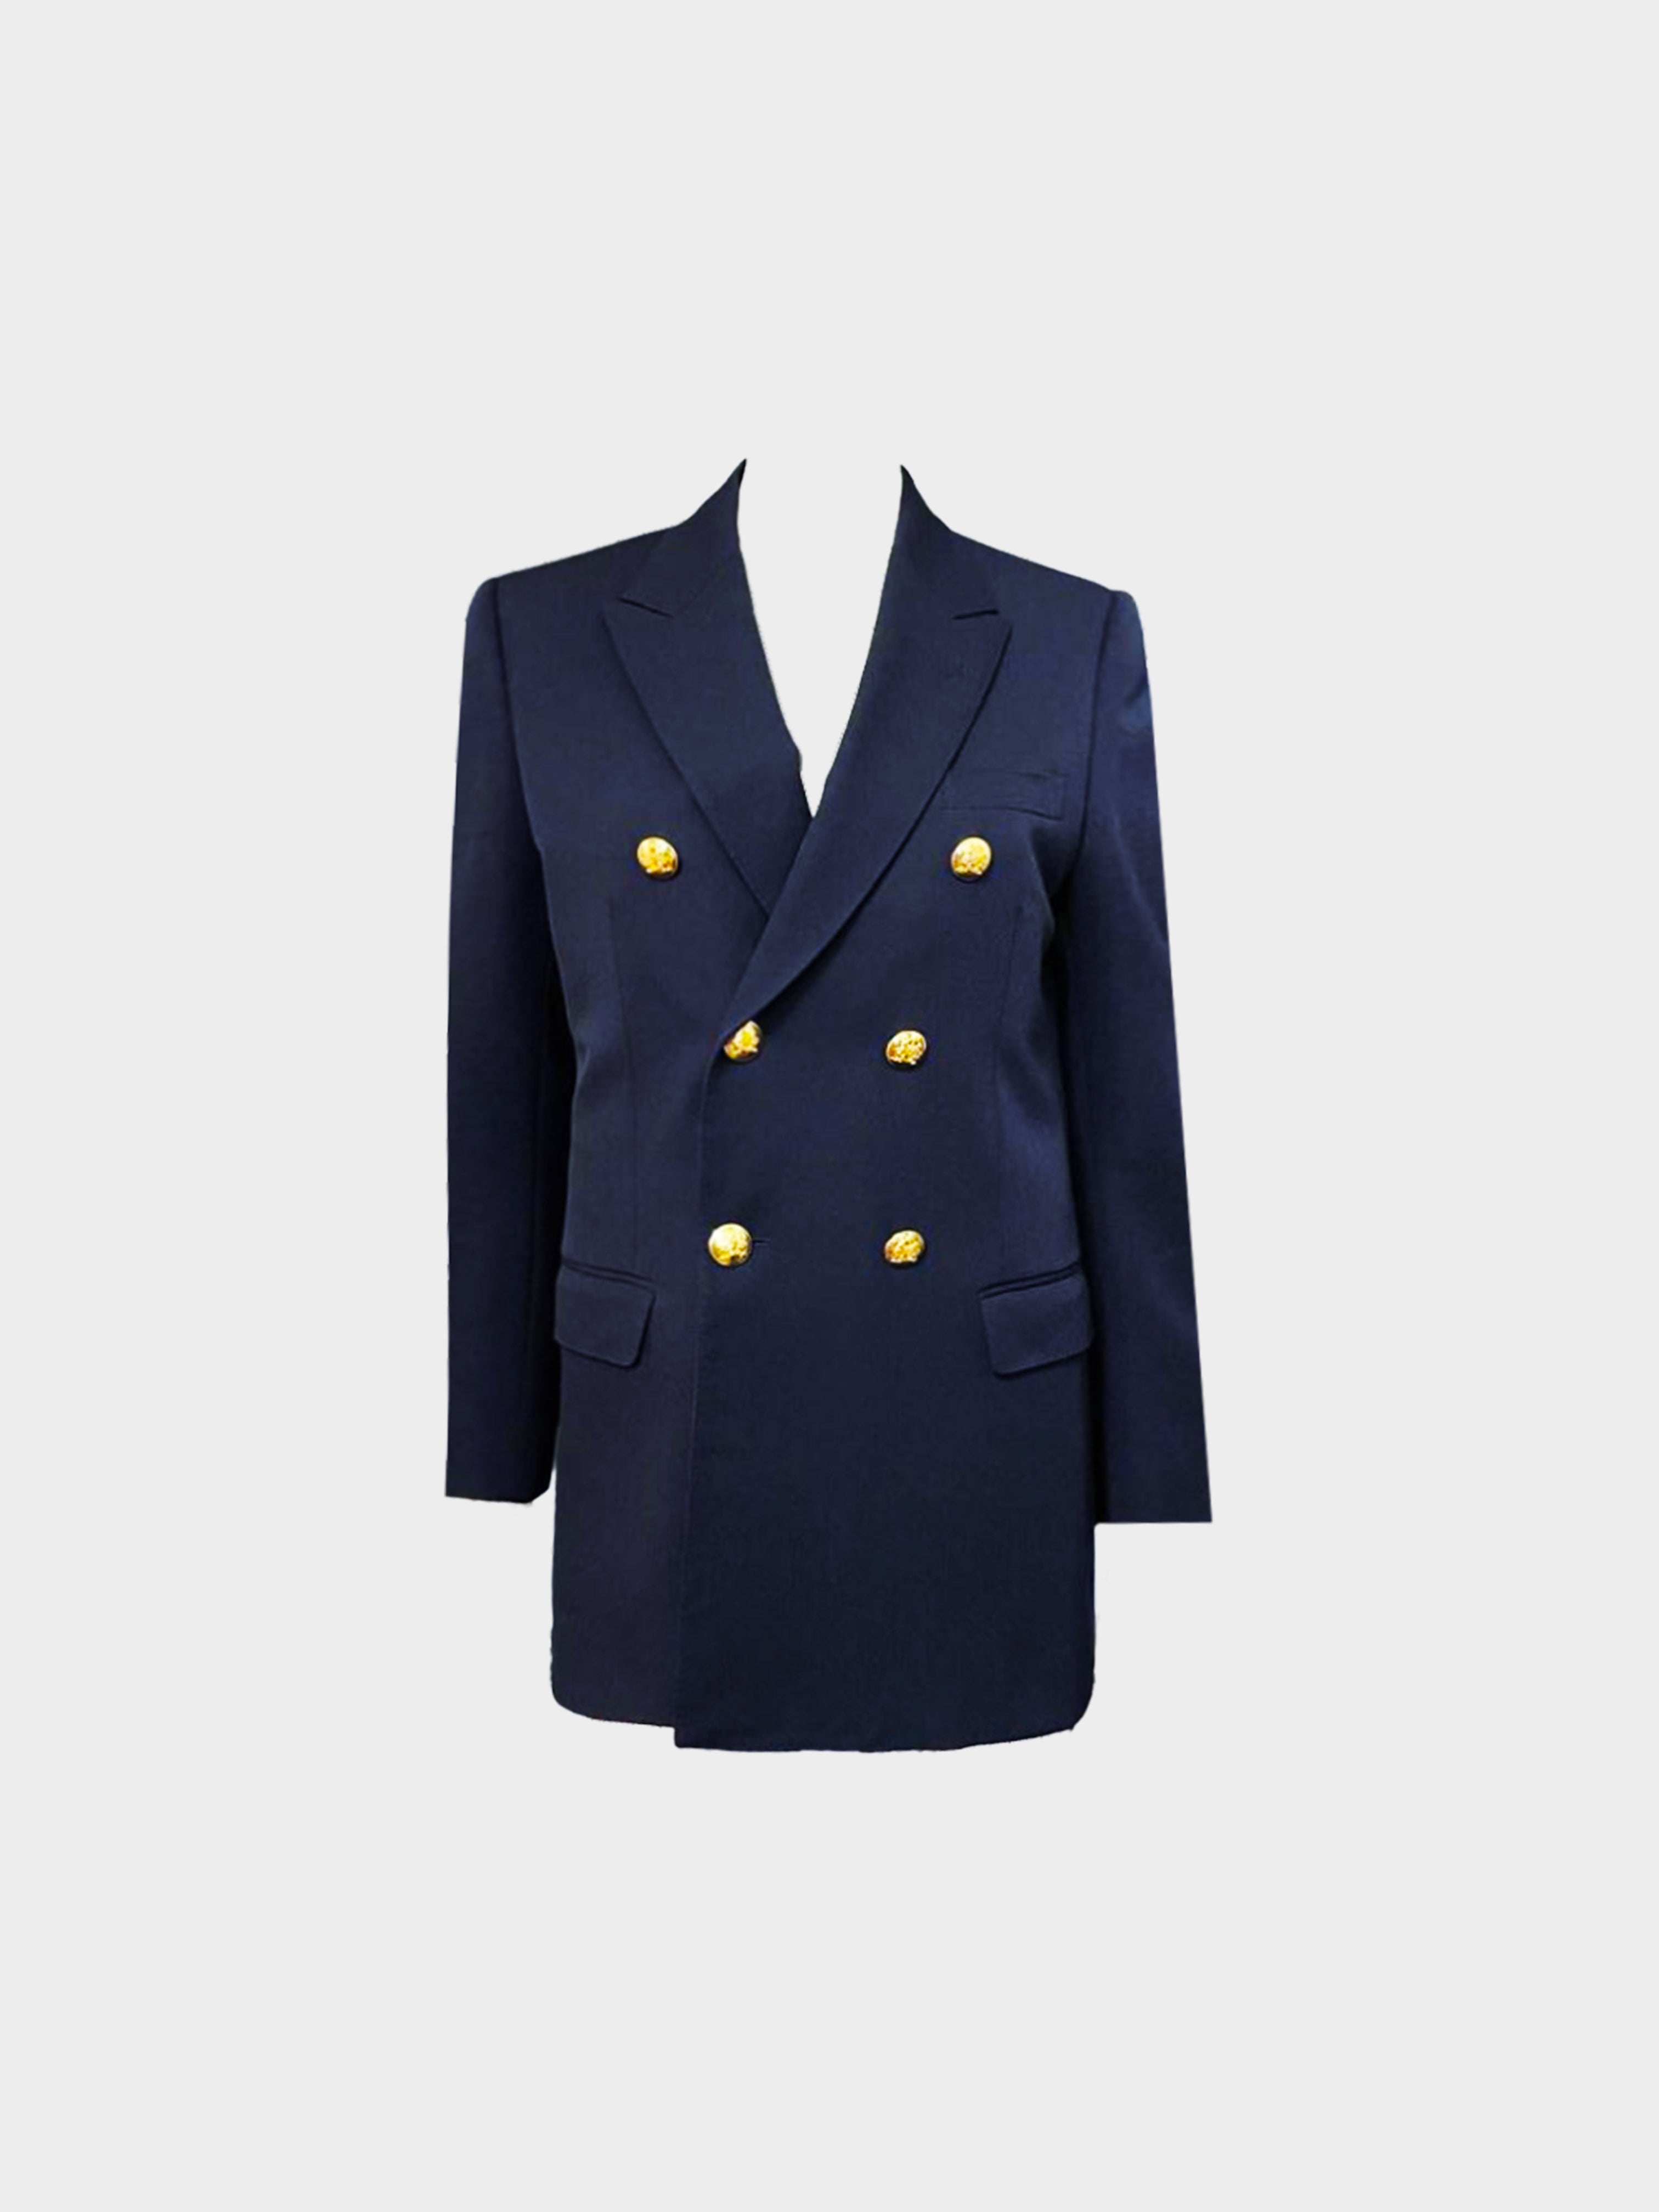 Celine 2020s Navy Double Breasted Long Jacket